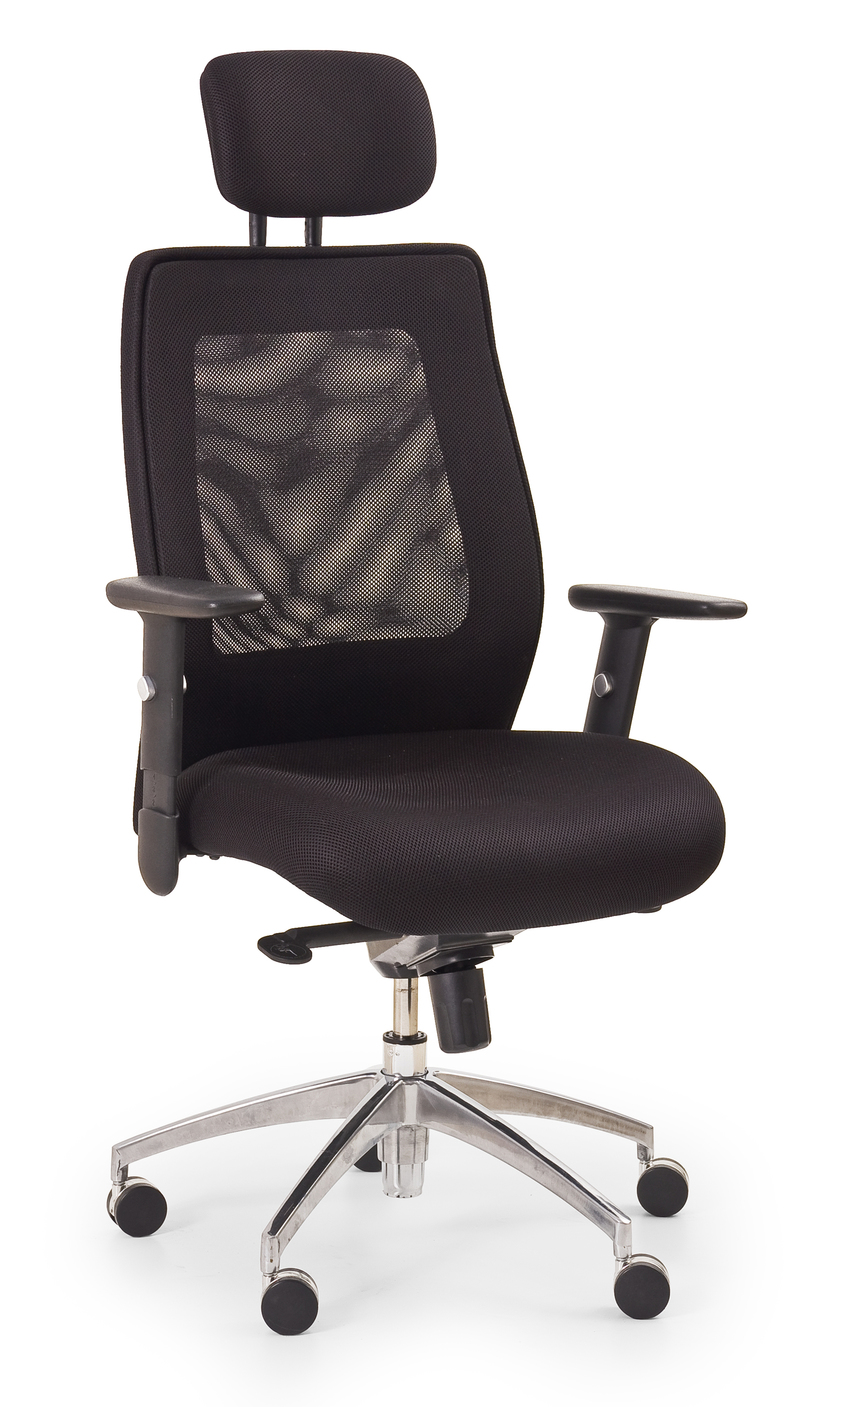 VICTOR chair color: black